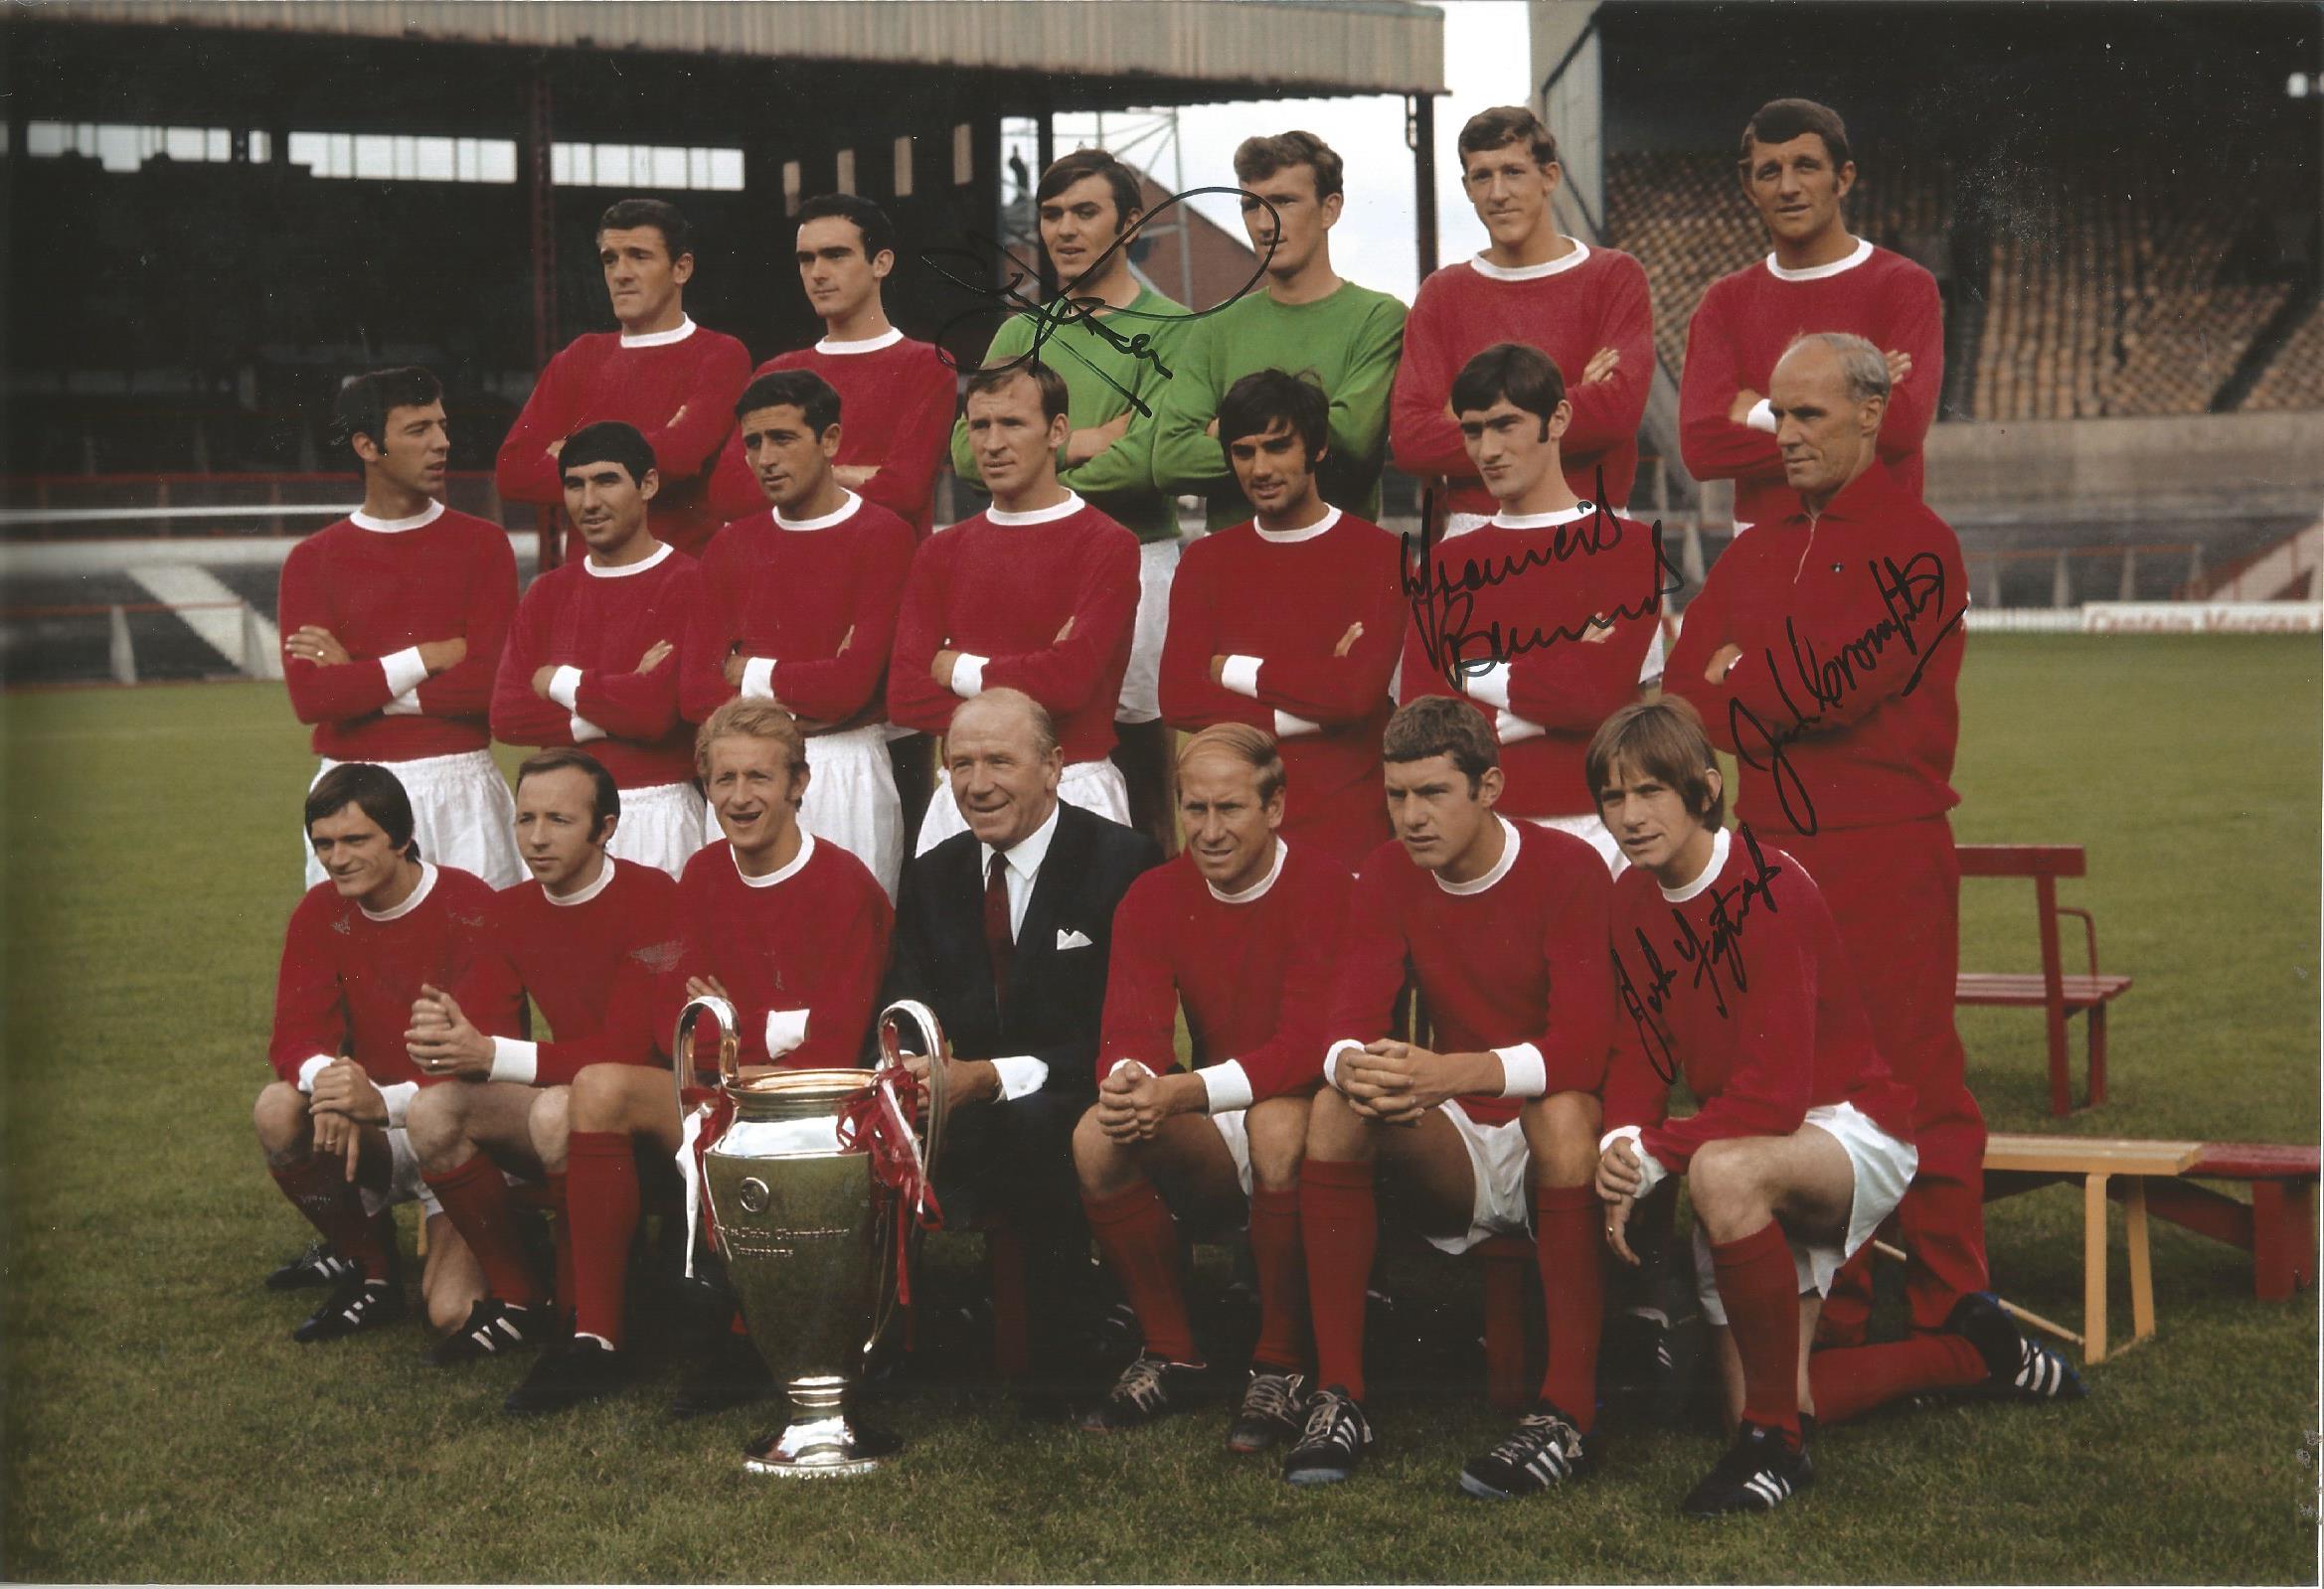 Autographed MAN UNITED 1968 photo, a superb image depicting players posing with the European Cup